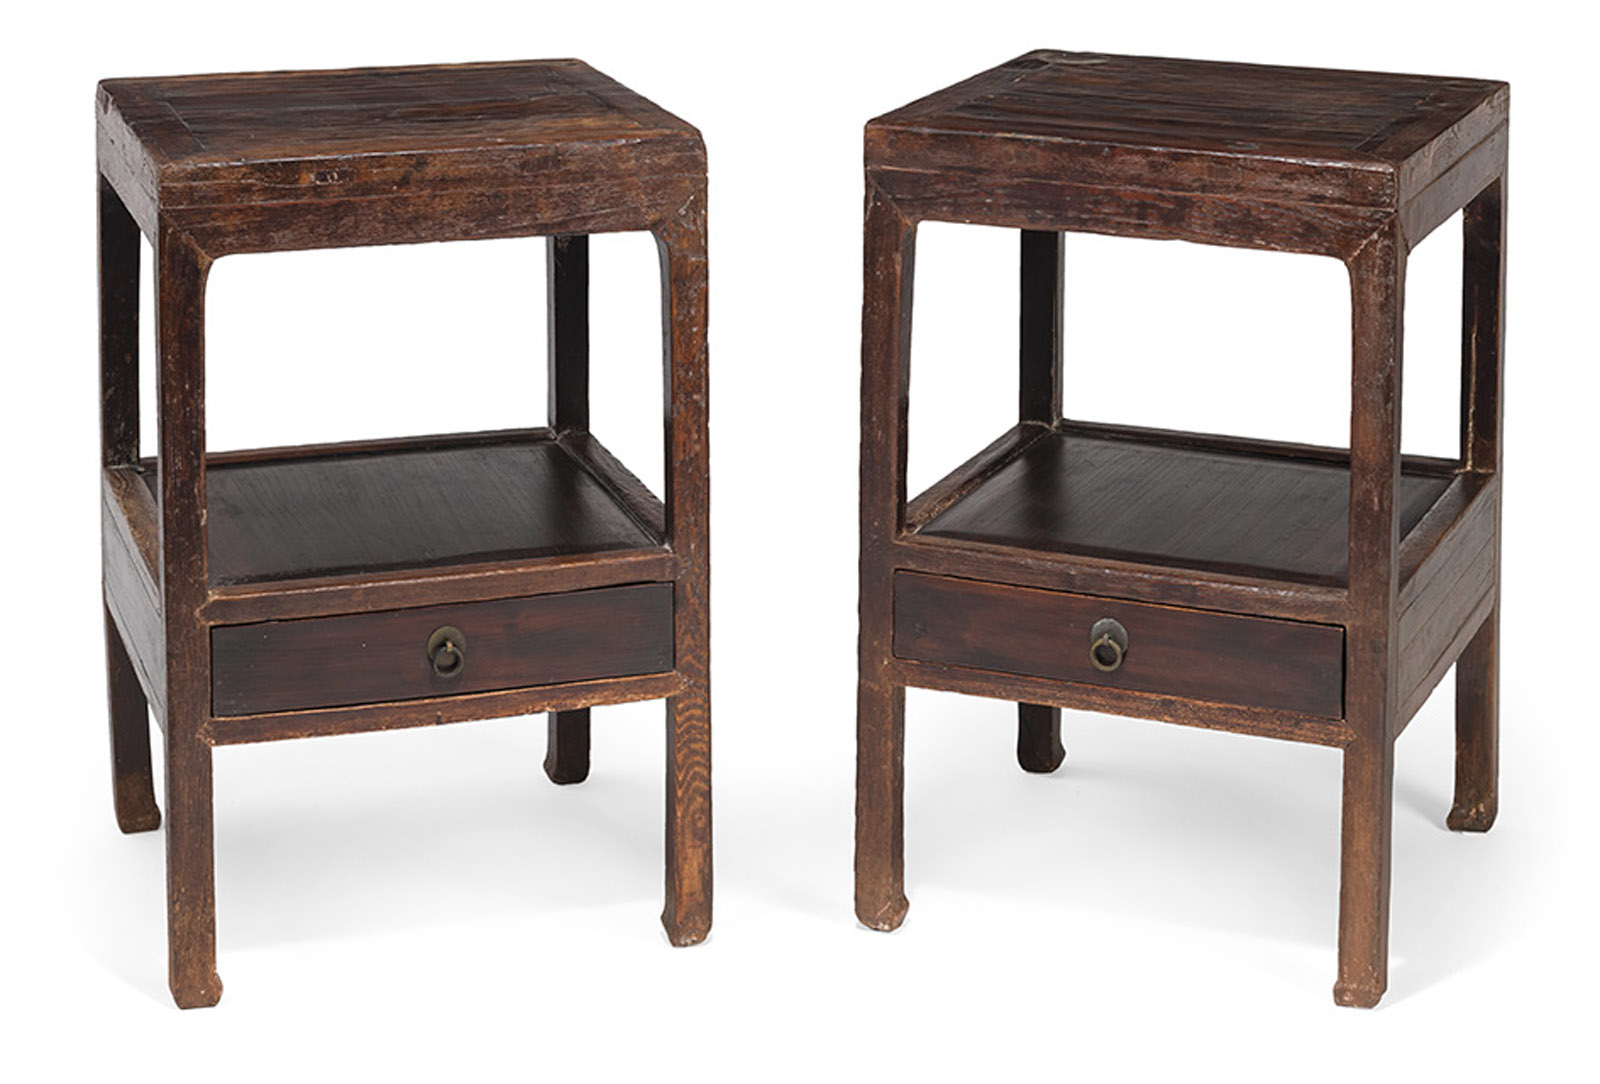 <b>A PAIR OF SINGLE-DRAWER SIDE TABLES</b>